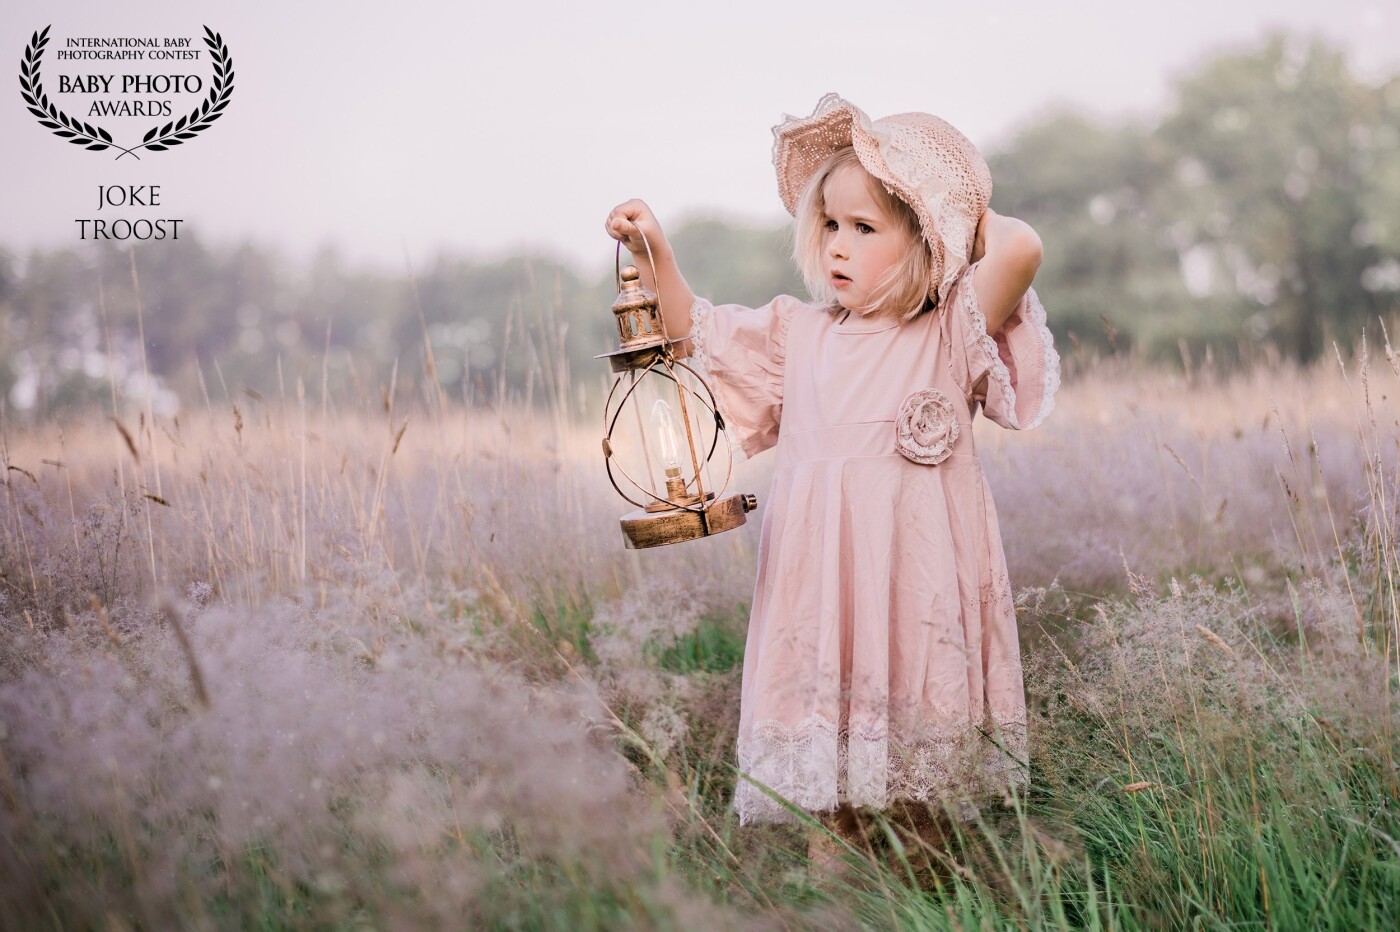 I saw the foggy grass on this field and knew I had to make some shots. The chance came when I got to photograph this little girl. With some clothes from my client closet the picture was complete.